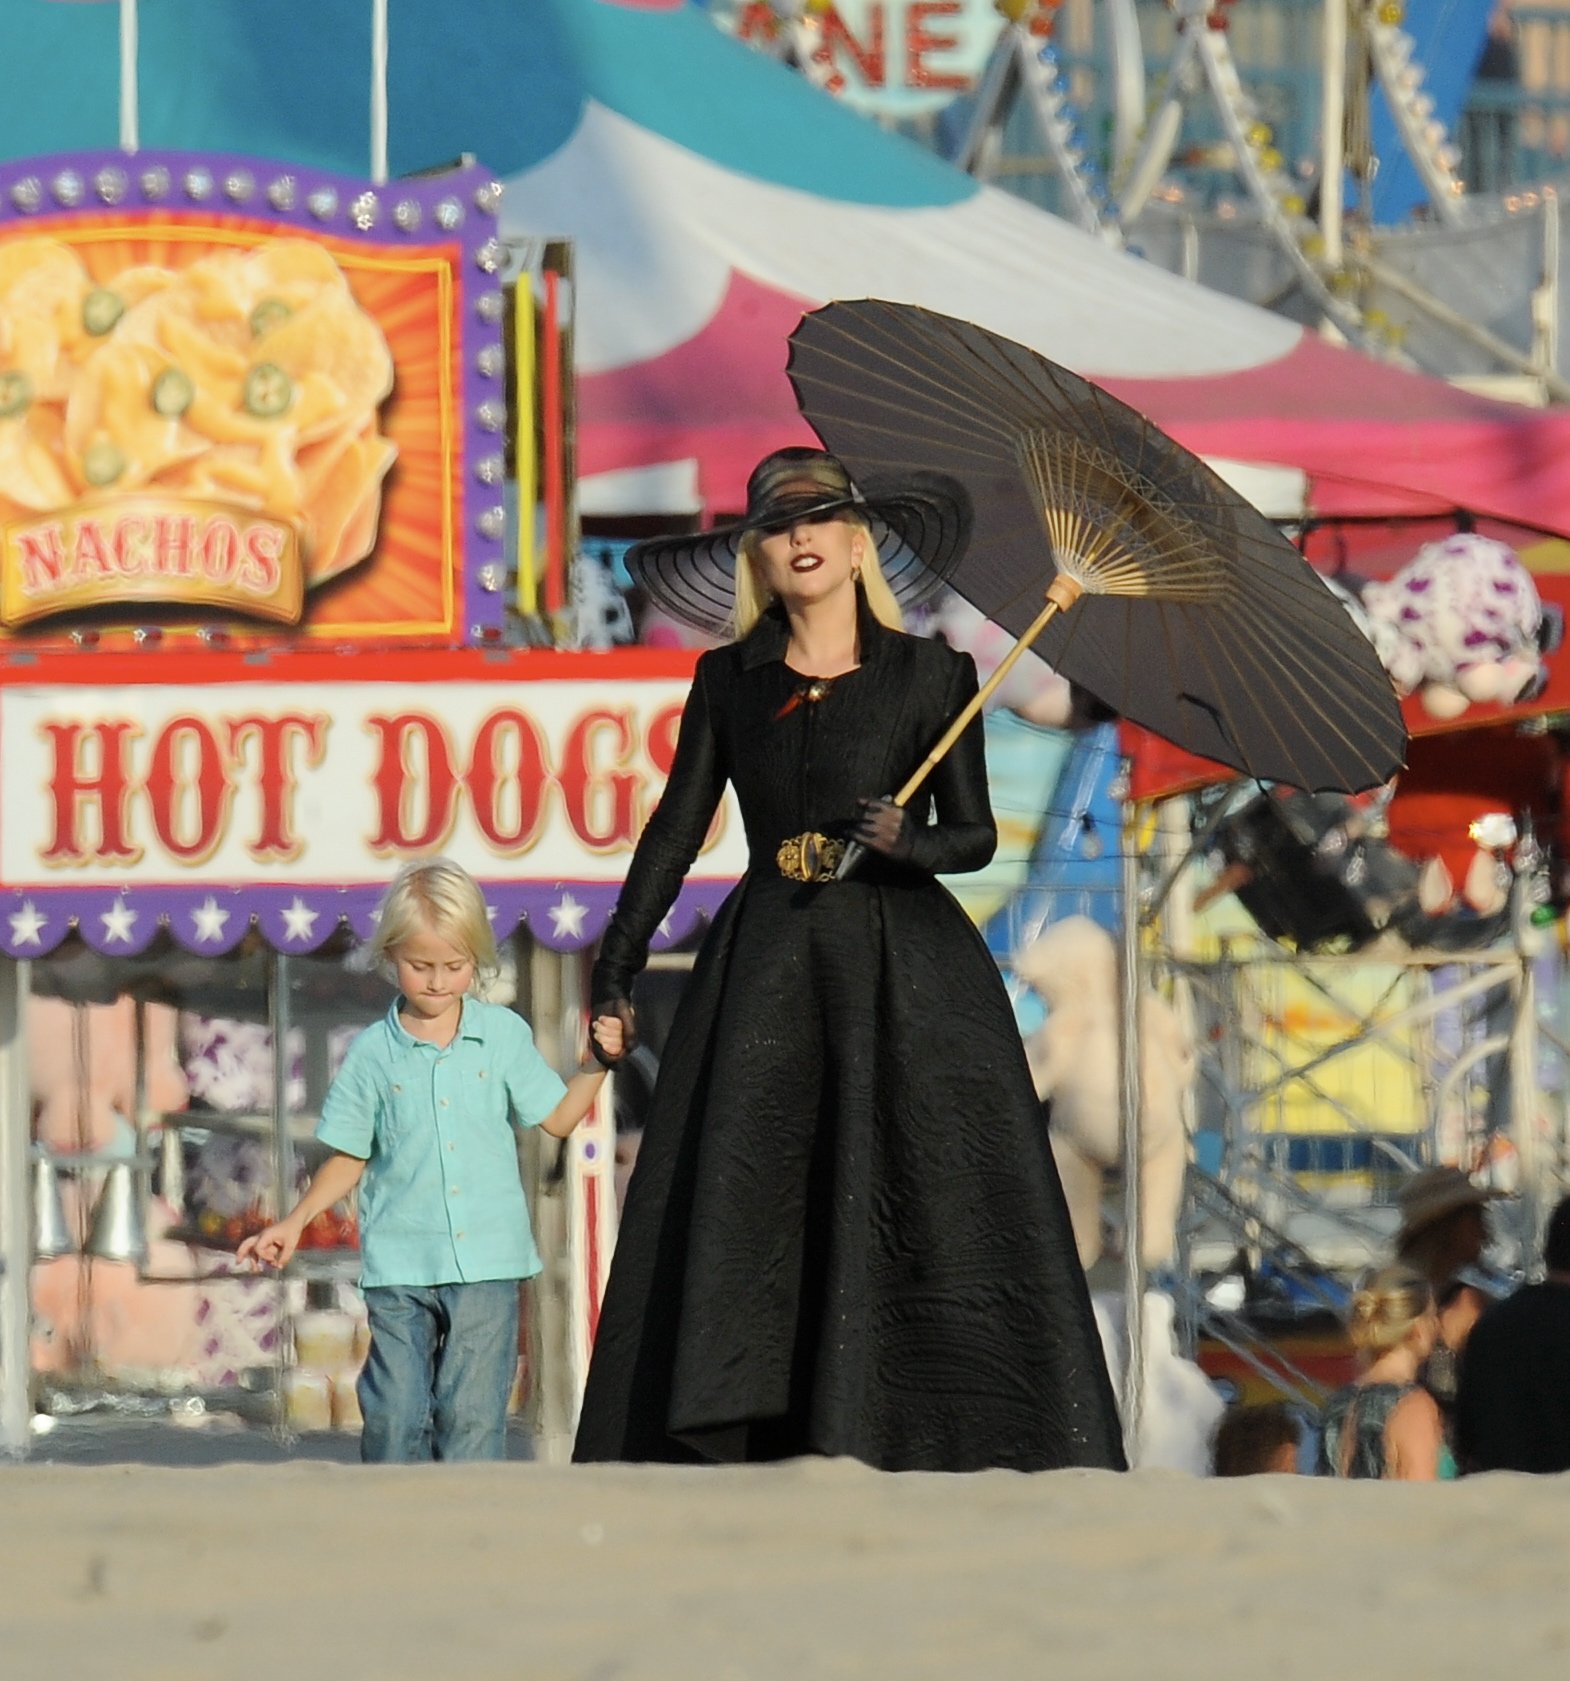 Countness Lady Gaga dress in all black for a beach carnival scene in Santa Monica for "American Horror Story Hotel" with co star Wes Bentley. The singer walk around the sand with black heels in a scorching hot day but had help with umbrellas and water fan for the crew.

Featuring: Lady Gaga
Where: Santa Monica, California, United States
When: 10 Sep 2015
Credit: Cousart/JFXimages/WENN.com
Countness Lady Gaga dress in all black for a beach carnival scene in Santa Monica for "American Horror Story Hotel" with co star Wes Bentley. The singer walk around the sand with black heels in a scorching hot day but had help with umbrellas and water fan for the crew.

Featuring: Lady Gaga
Where: Santa Monica, California, United States
When: 10 Sep 2015
Credit: Cousart/JFXimages/WENN.com